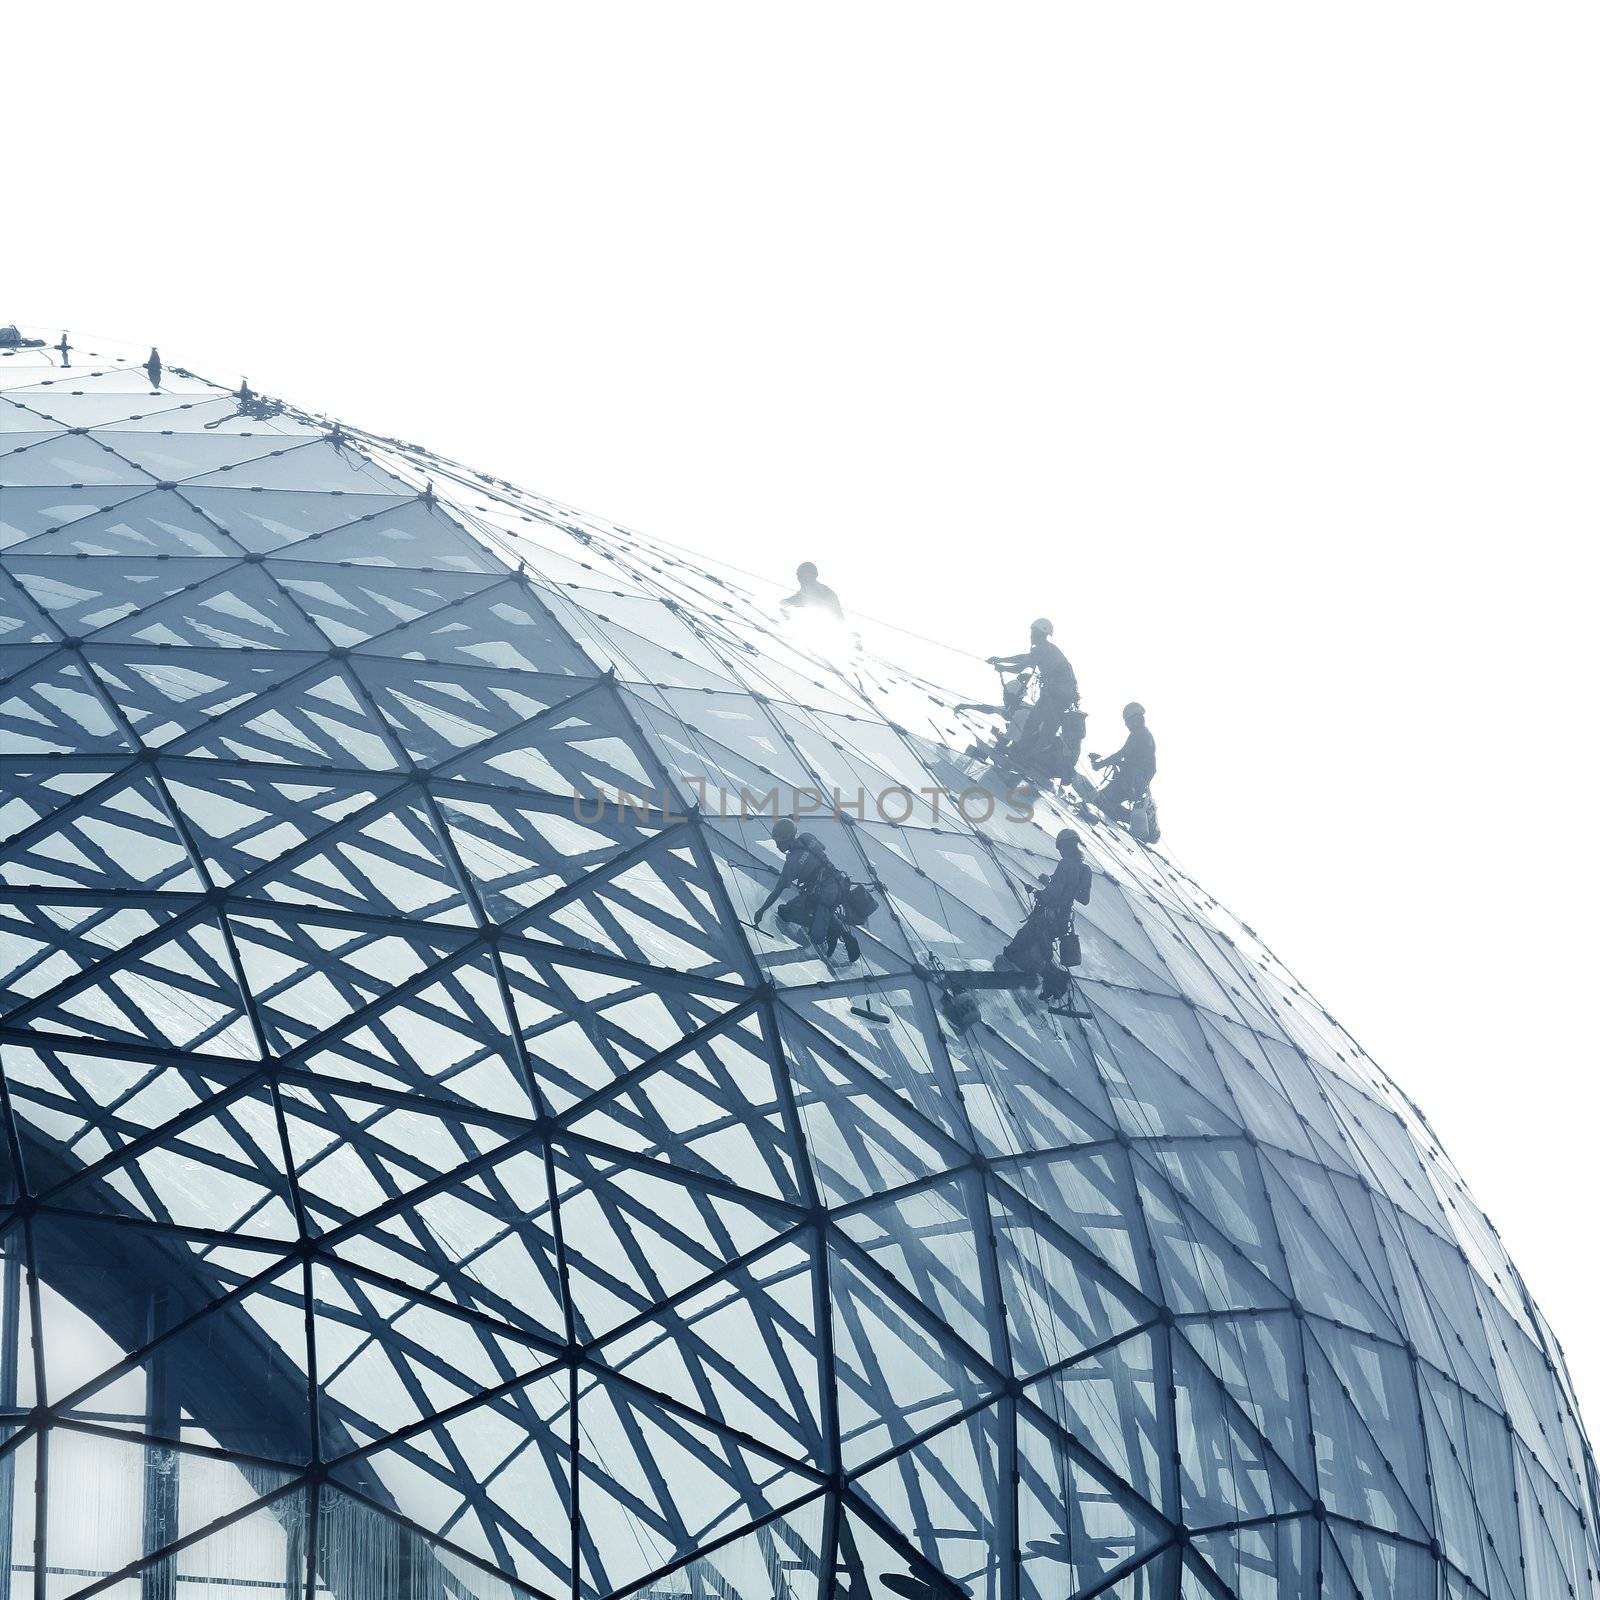 Workers cleaning a round glass facade by lunamarina